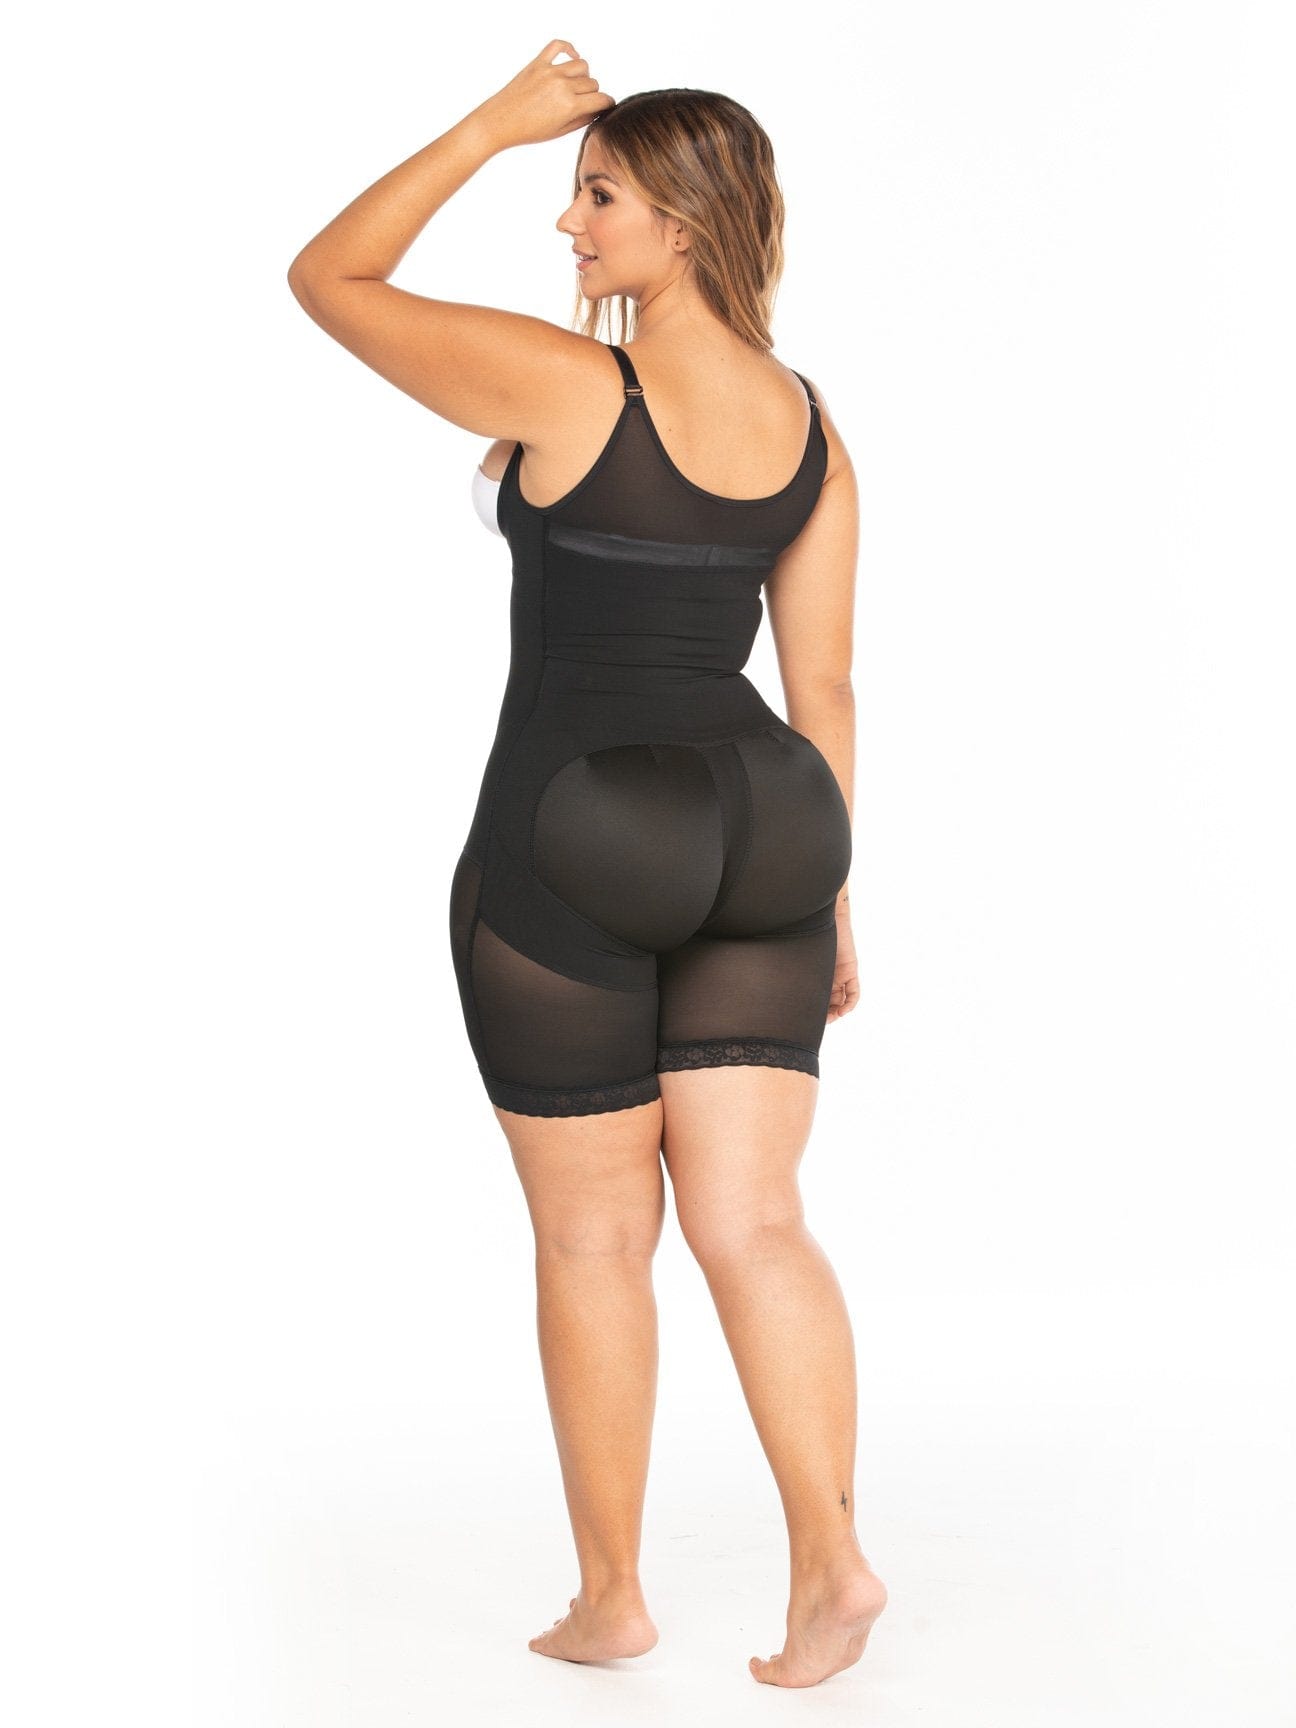 back view thick curvy latina butt lifter wearing high compression faja with vest